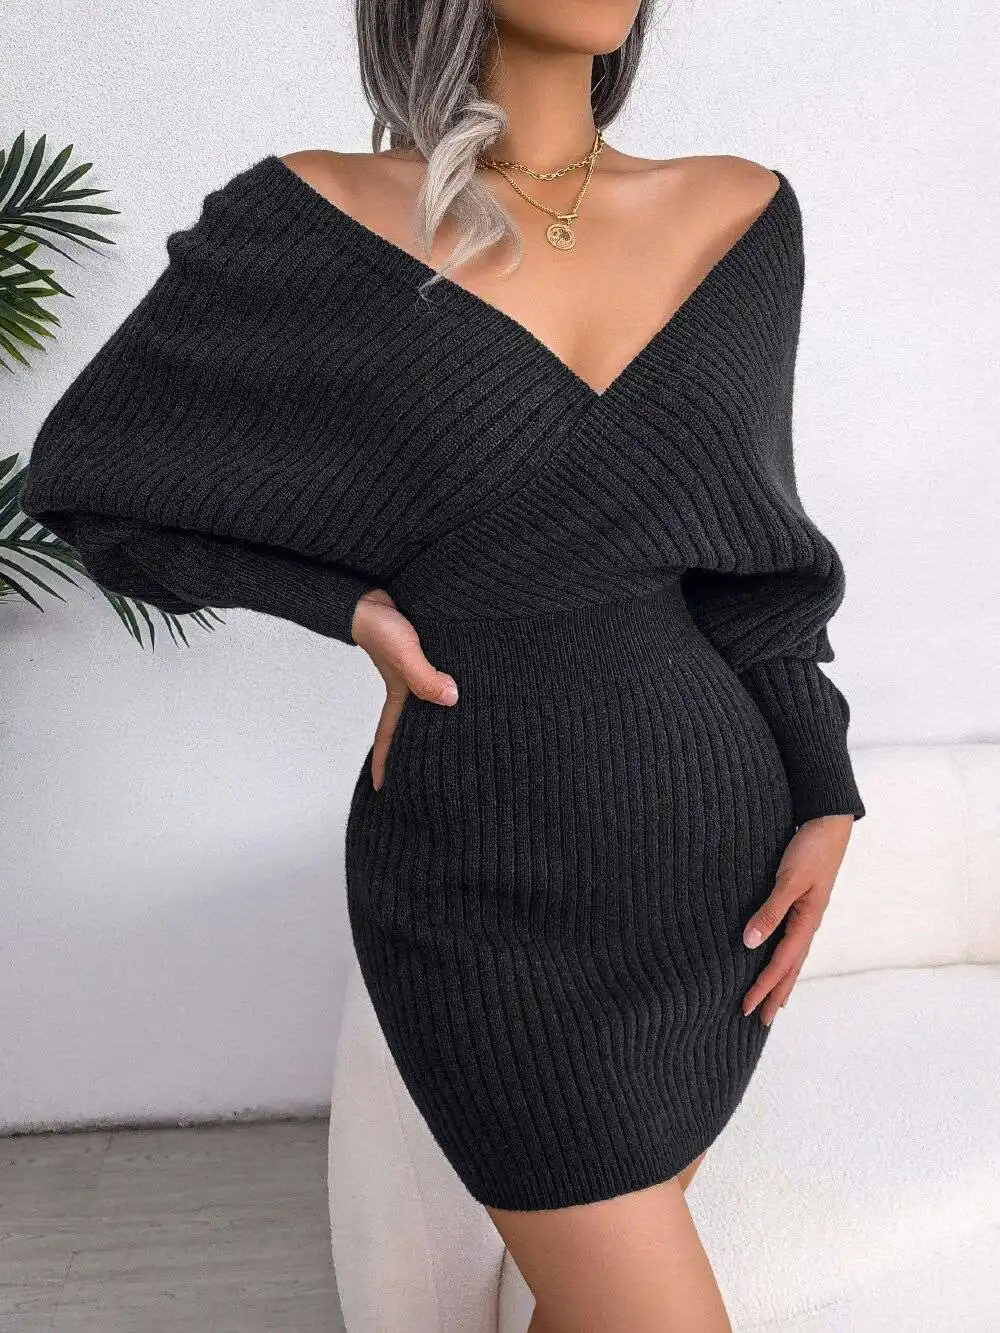 Women's clothing autumn winter knit dress pullover v neck fashion slim solid casual sweater women dresses